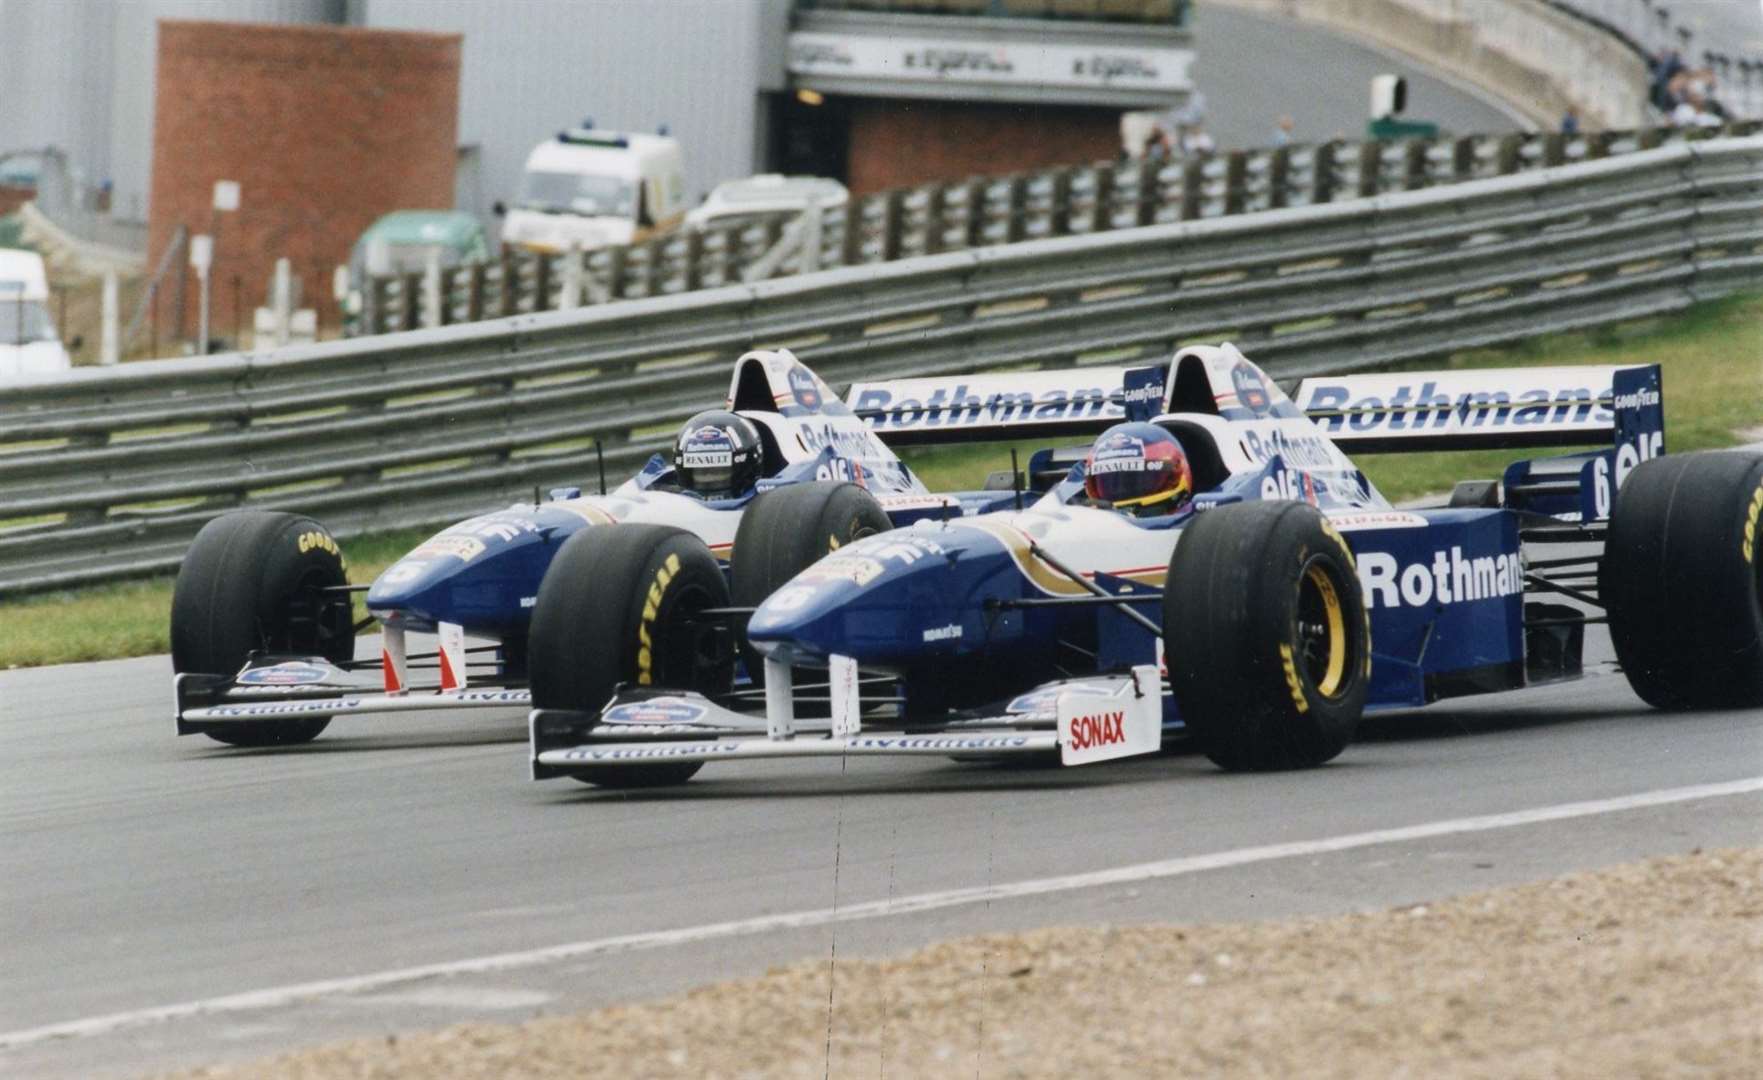 In 1996, Hill joined Williams team-mate Jacques Villeneuve at Brands Hatch for a filming day